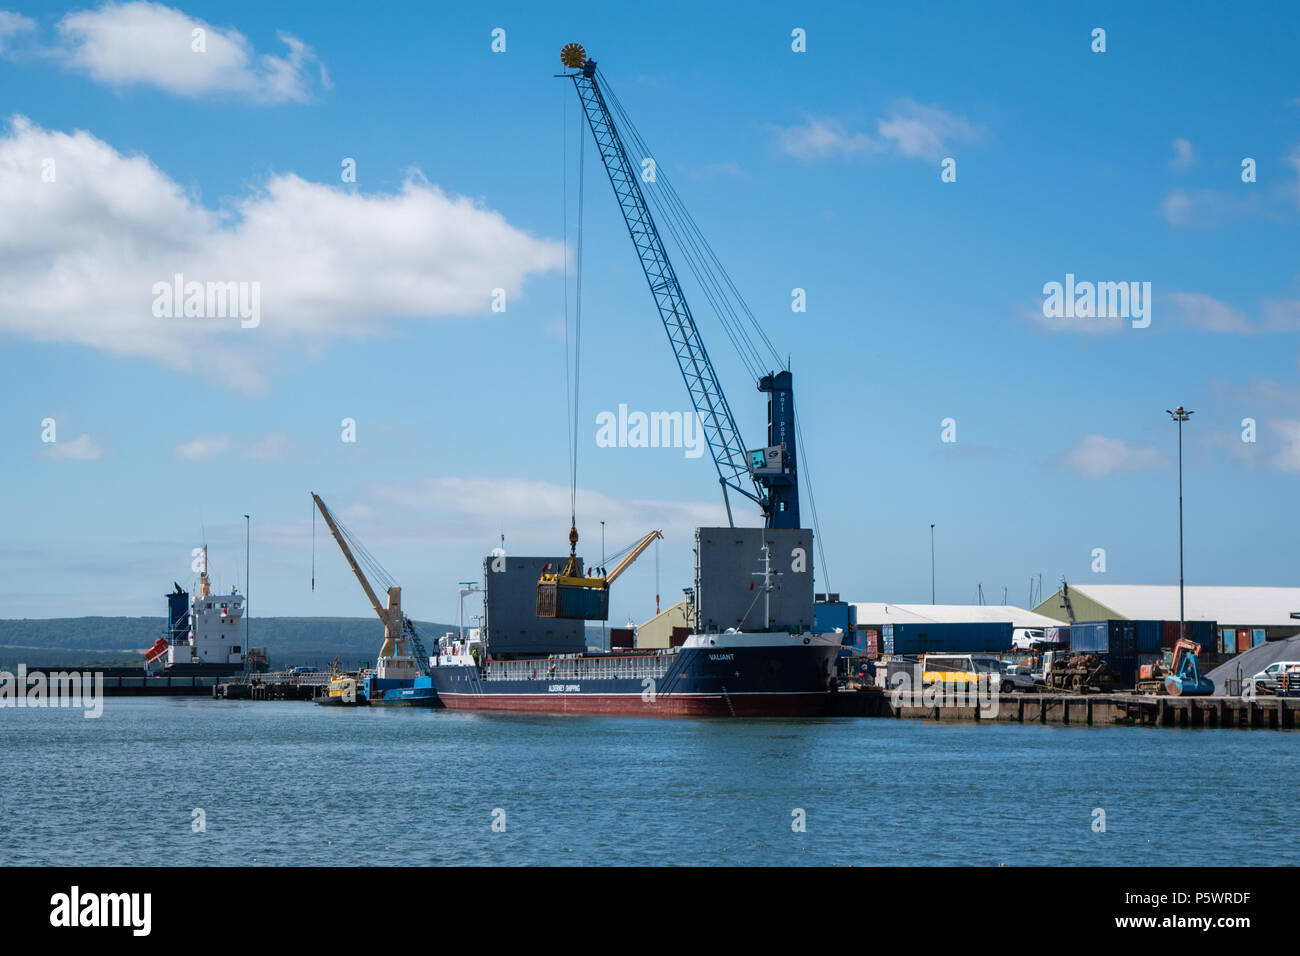 The Valiant - Alderney Shipping Company - Channel Seaways Lineage Ship being loaded with shipping containers on a sunny Summers Day in June 2018. Stock Photo